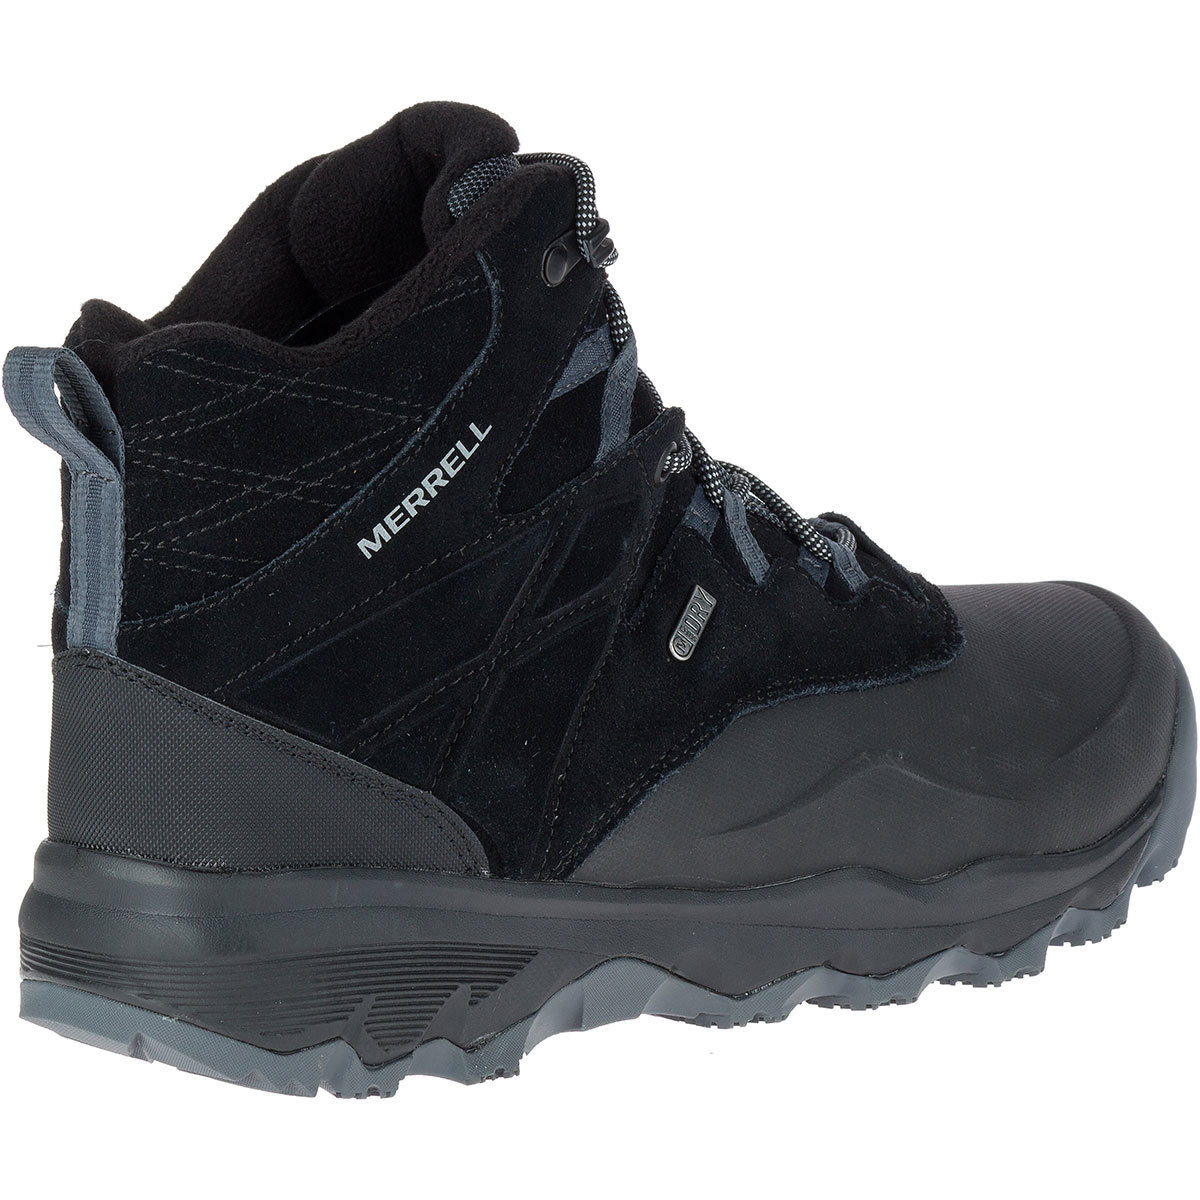 Thermo Shiver 6-Inch Waterproof Boots 